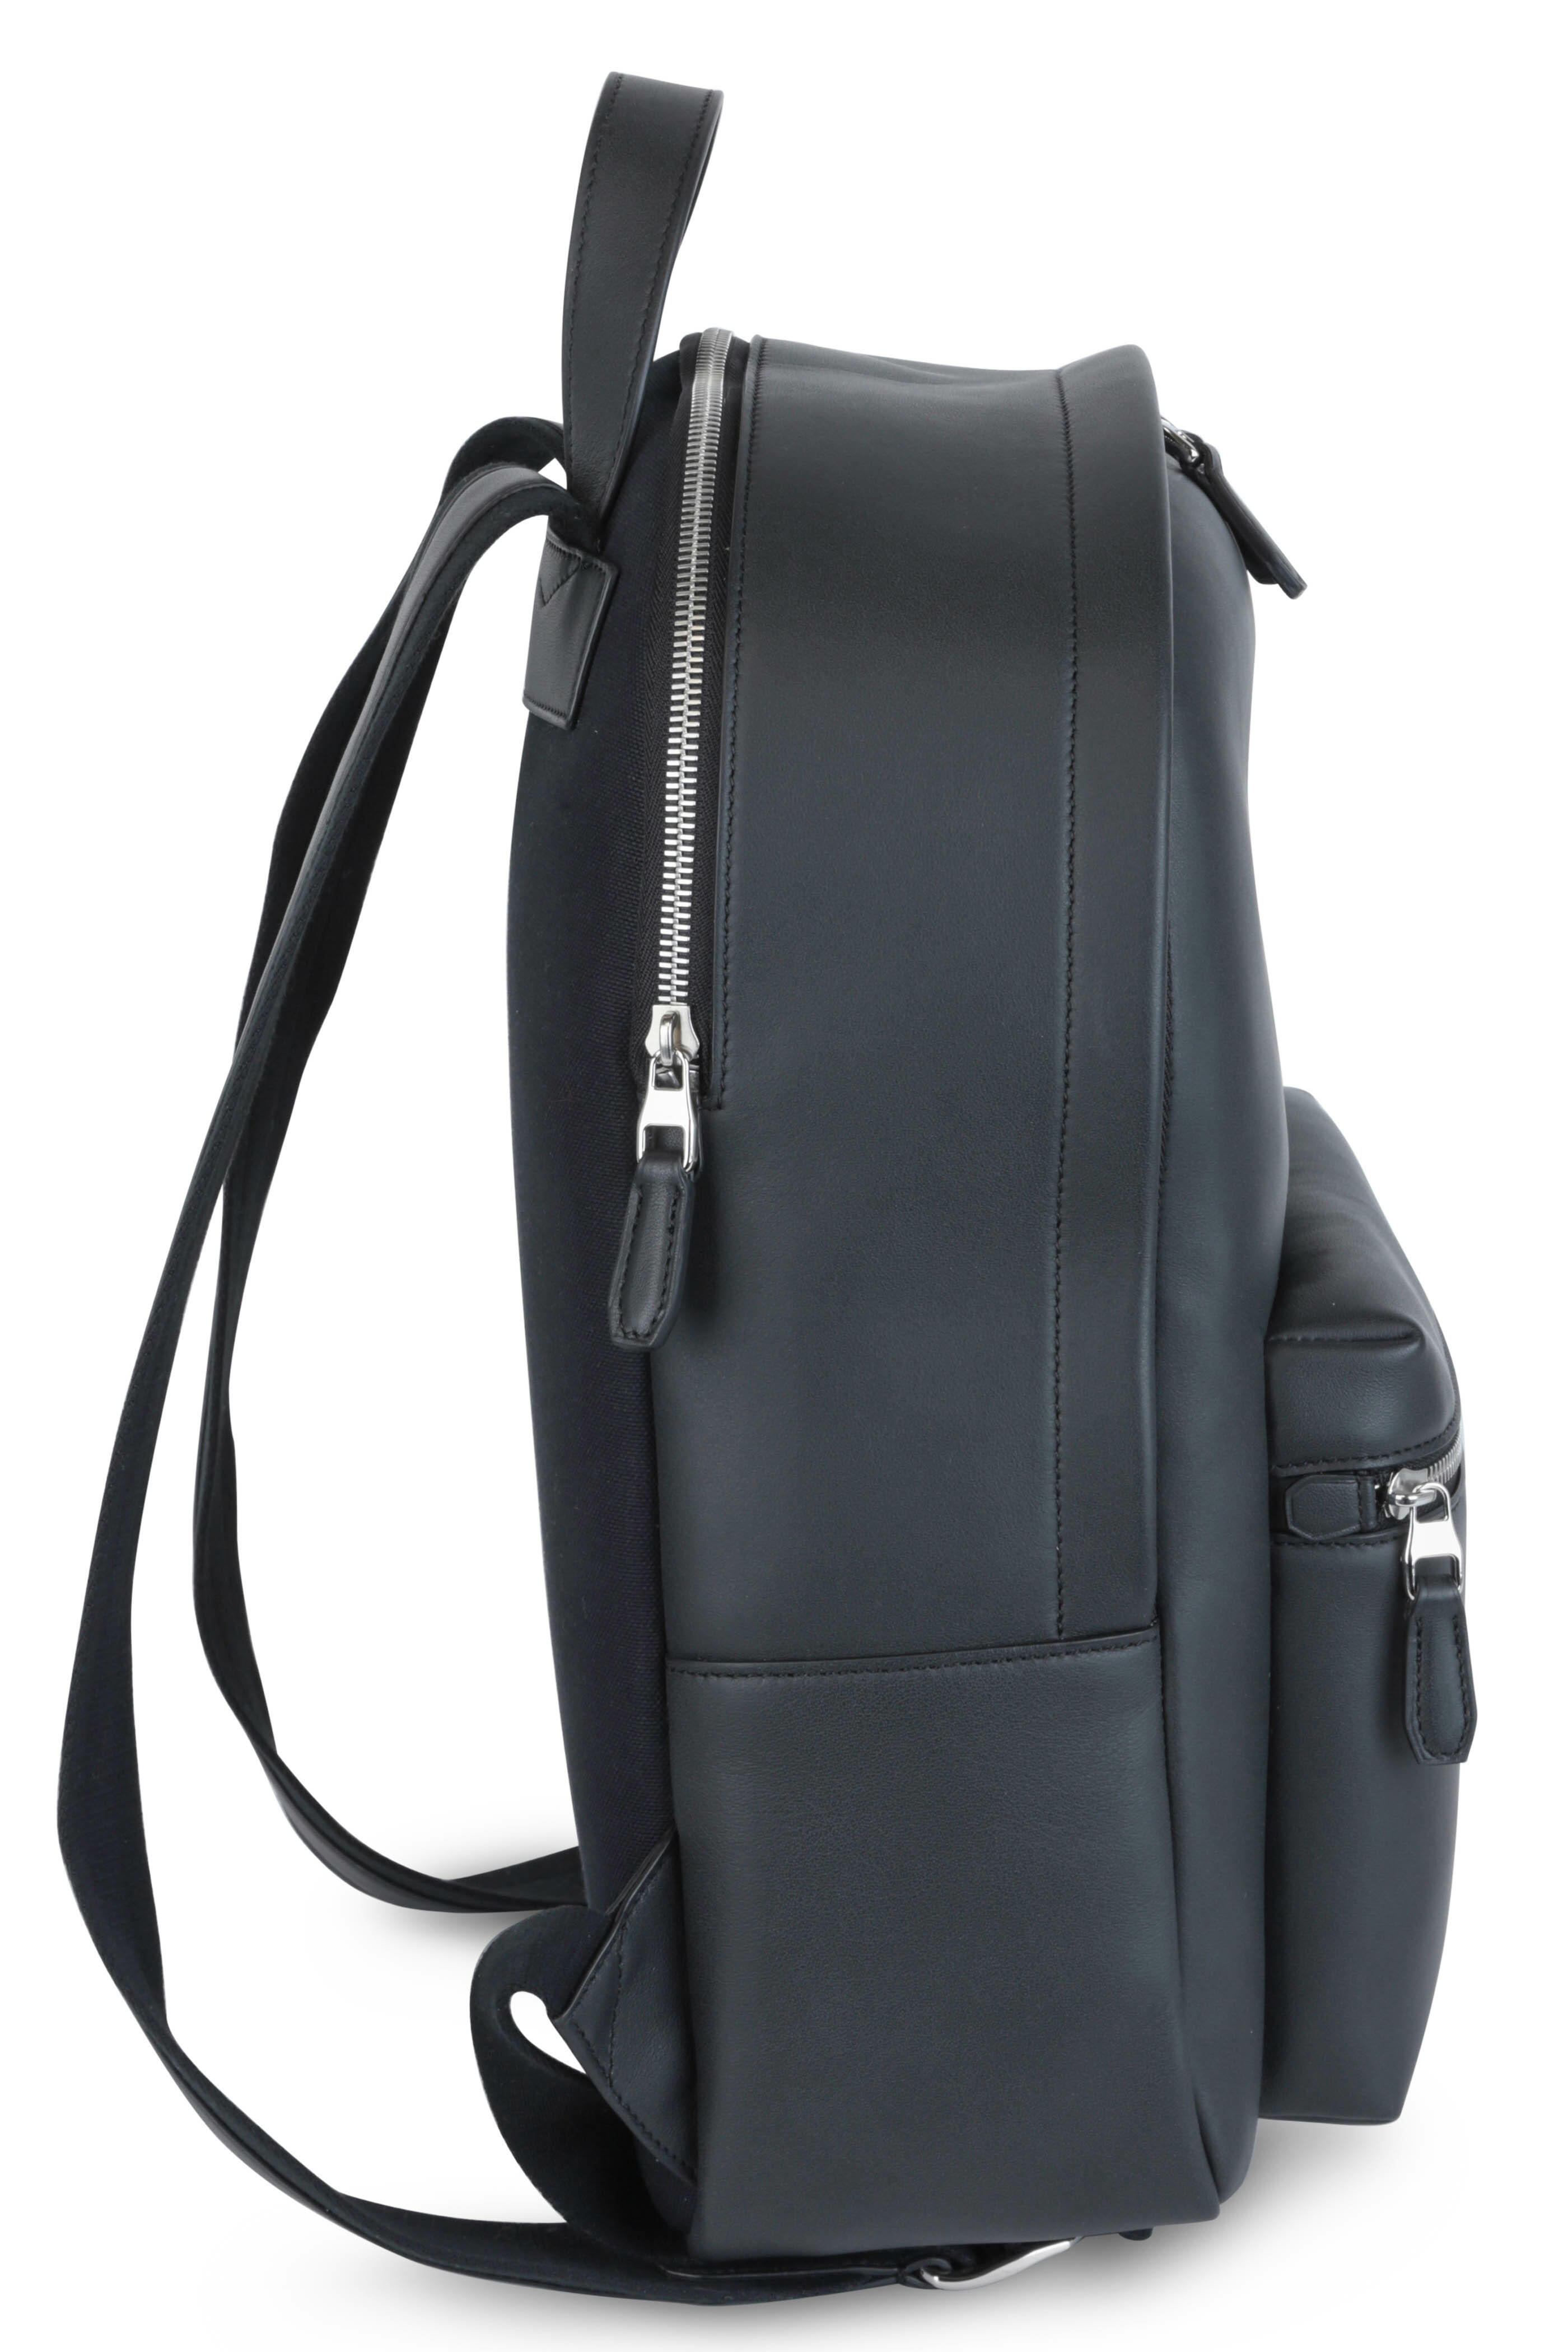 Dunhill - Black Leather Rucksack | Mitchell Stores